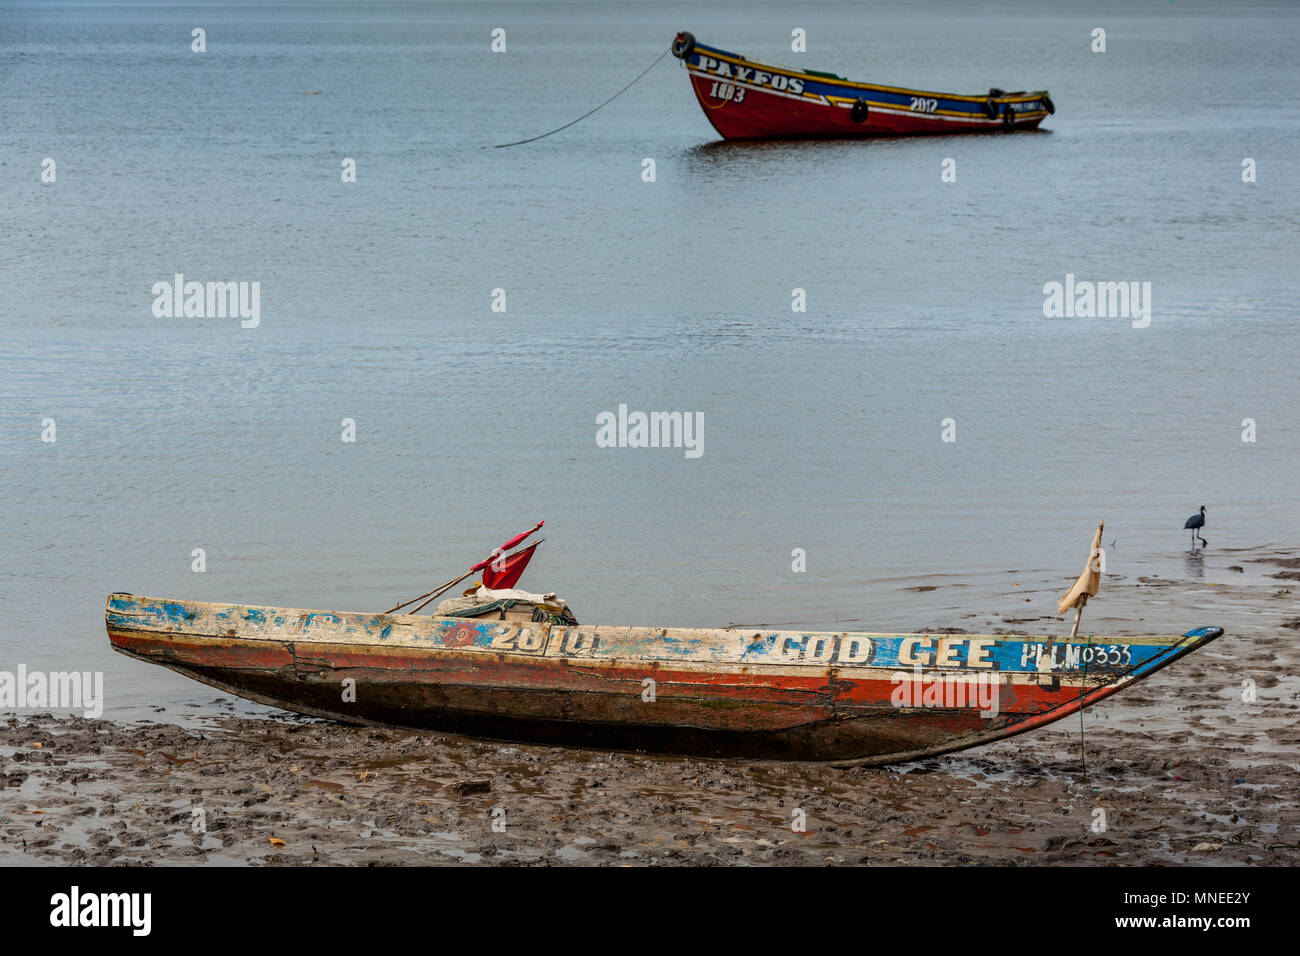 Bunce Island, Sierra Leone - June 02, 2013: West Africa, boats in the Bunce Island, was a British slave trading post in the 18th century. Sierra leone Stock Photo